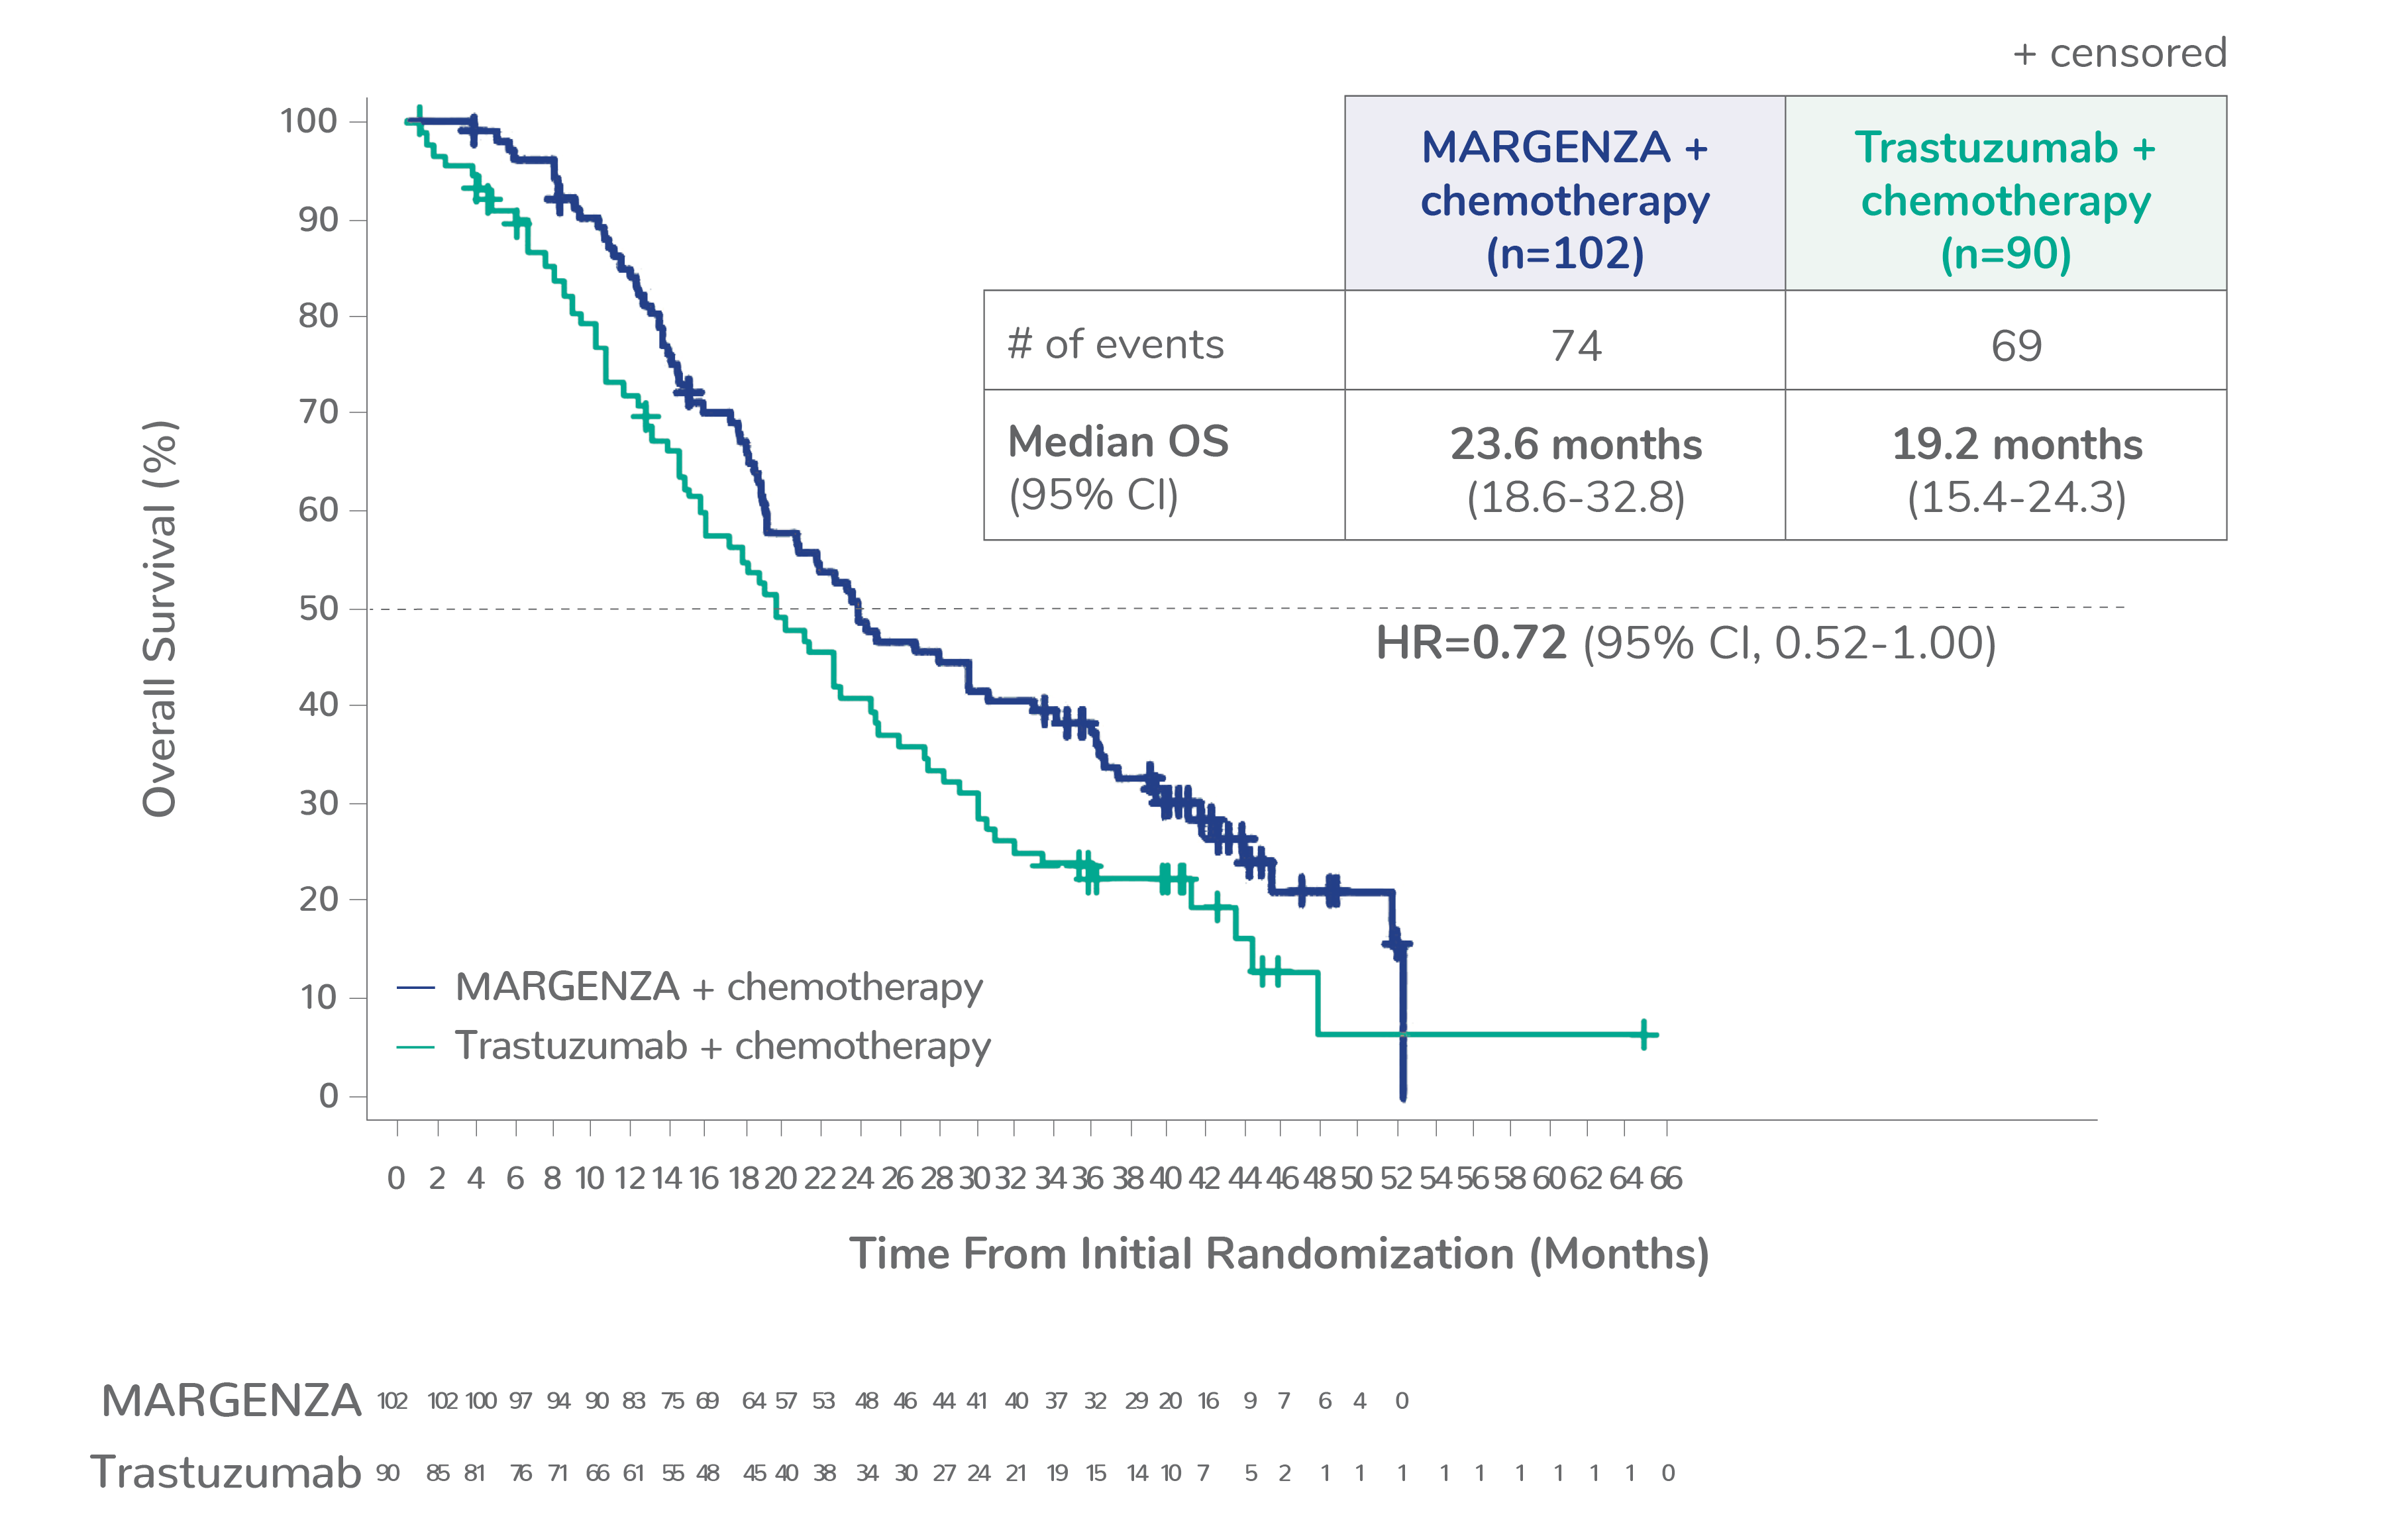 Kaplan Meyer curve showing median overall survival for CD16A FF genotype of 23.6 months for MARGENZA plus chemotherapy in 102 patients compared to 19.2 months for trastuzumab plus chemotherapy in 90 patients. The hazard ratio was 0.72. 